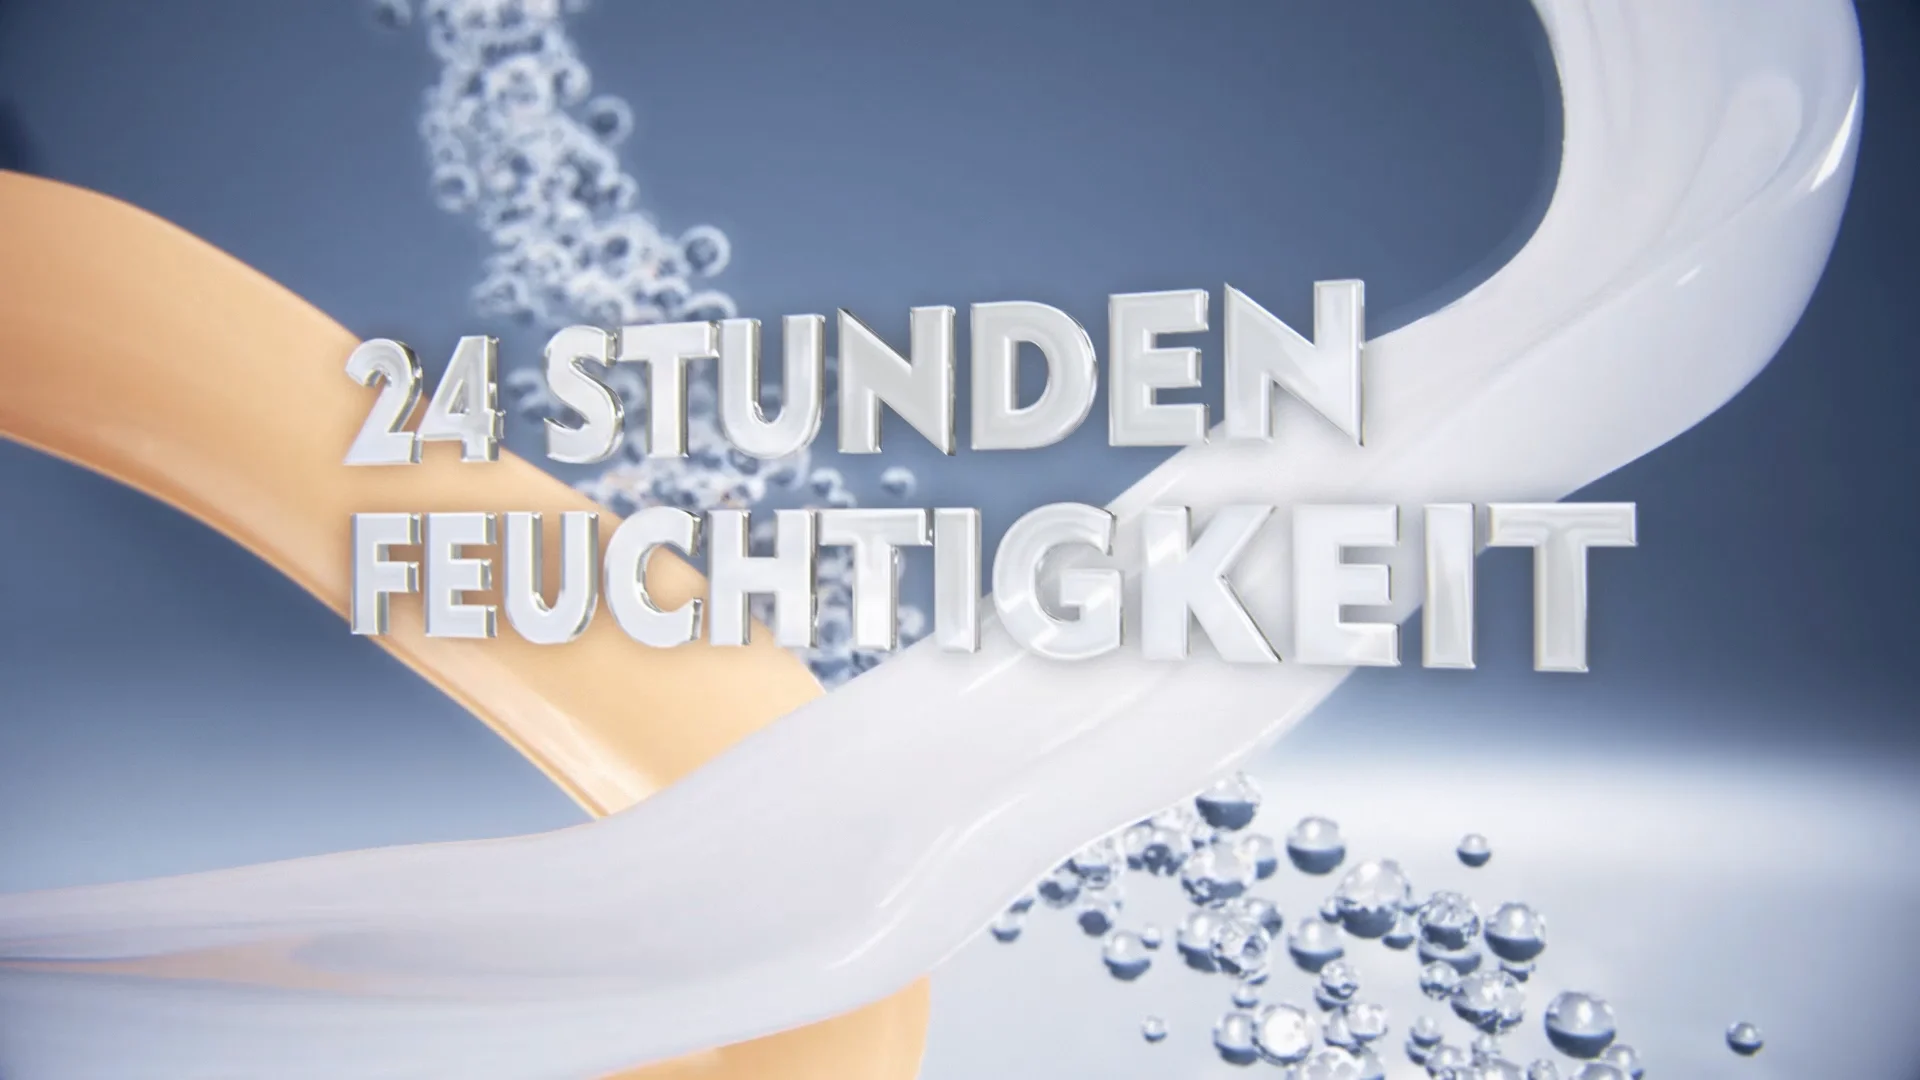 close up of ingredients. a brown liquid, a white liquid and blueish bubbles behind the words 24 STUNDEN FEUCHTIGKEIT